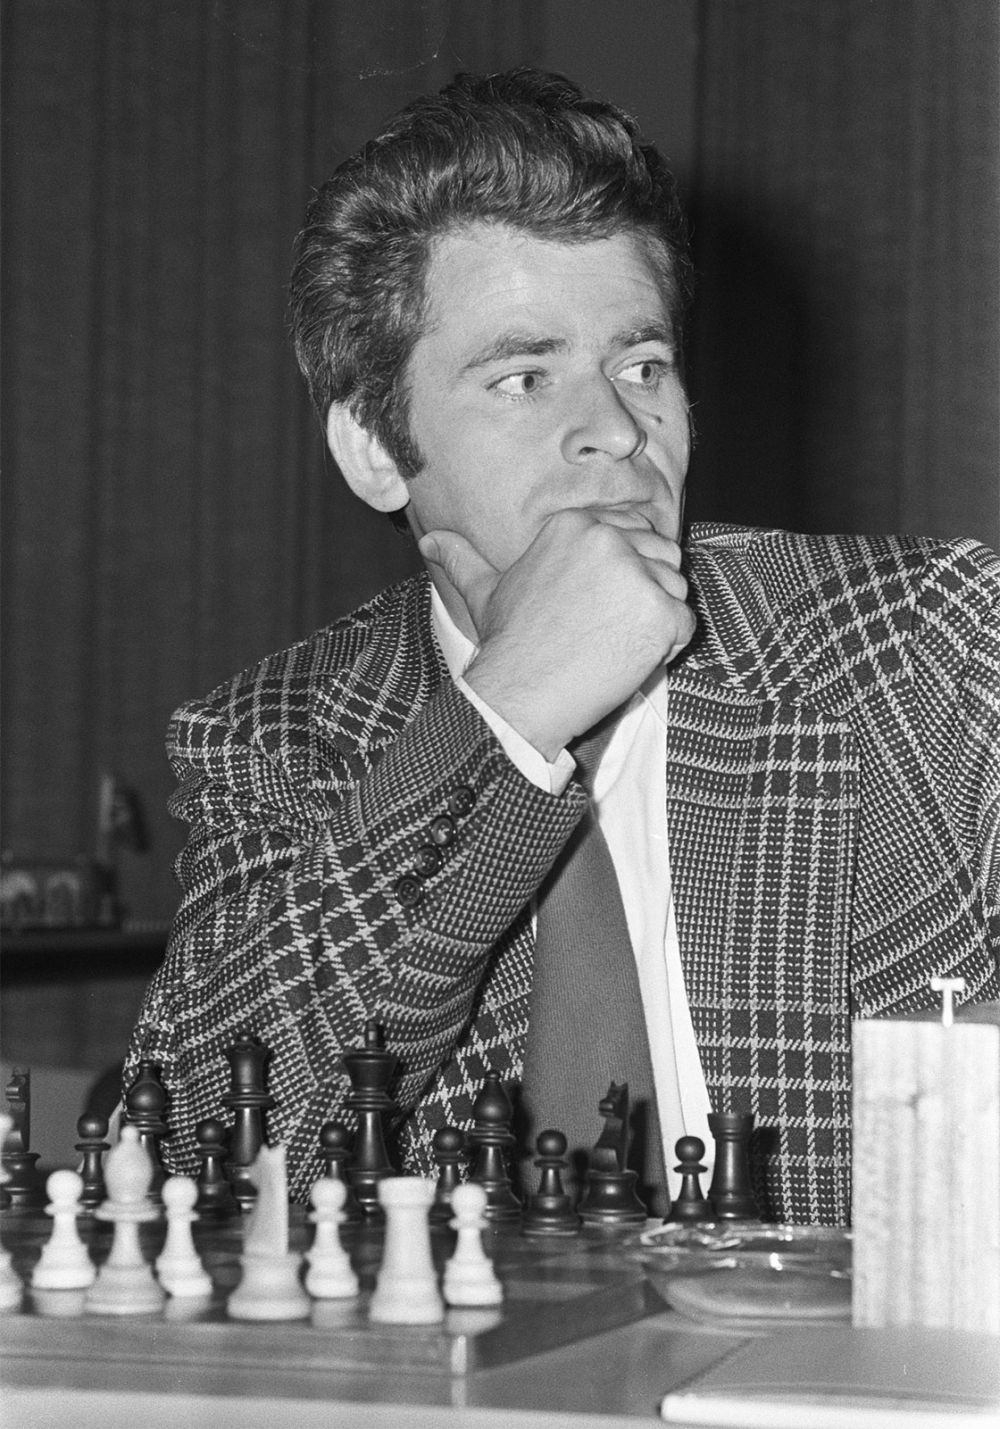 Spassky: “I still look at chess with the eyes of a child